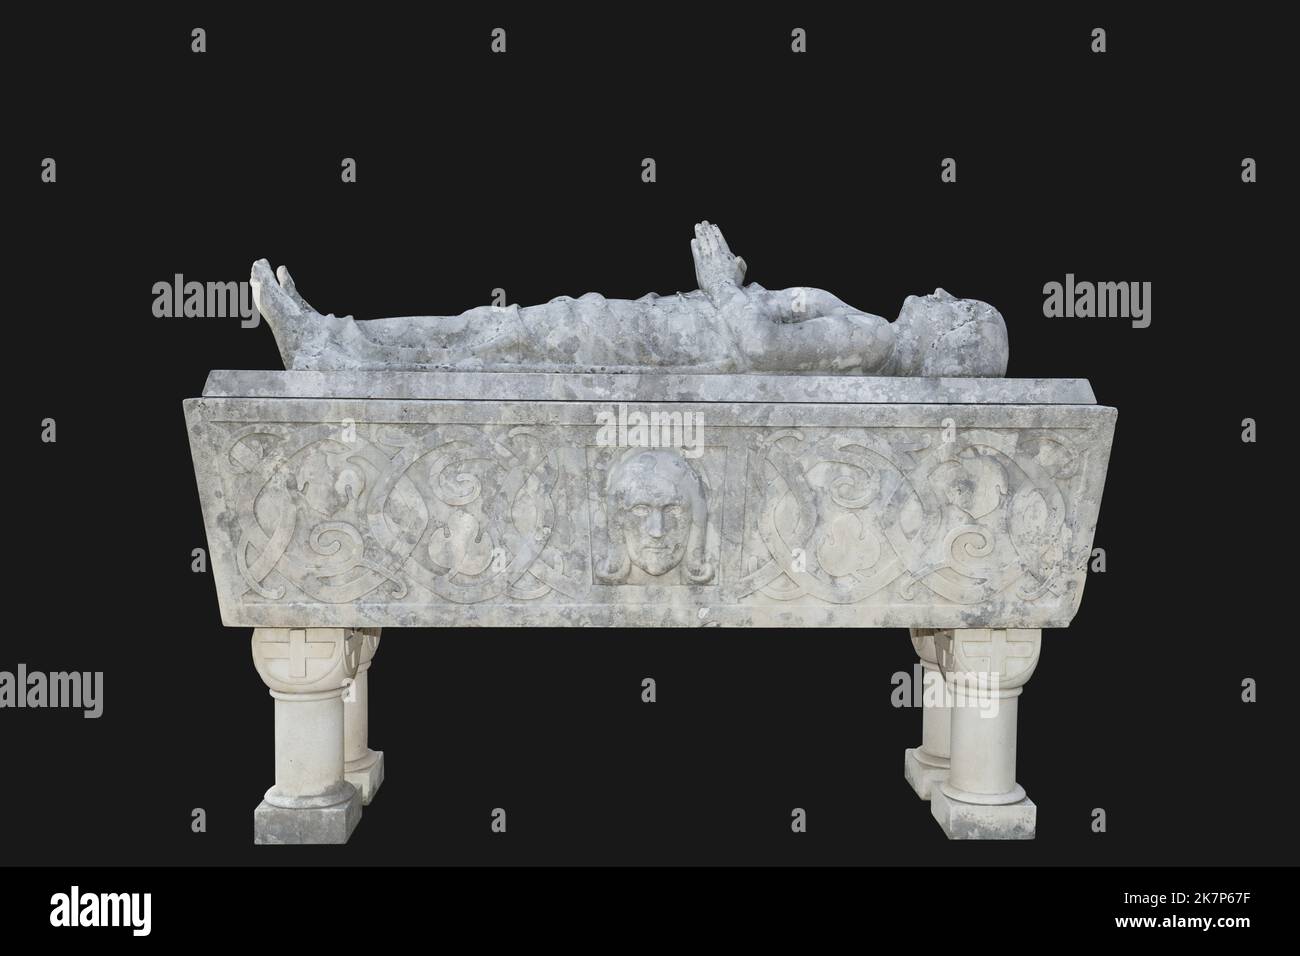 Old sarcophagus with relief on the side Stock Photo